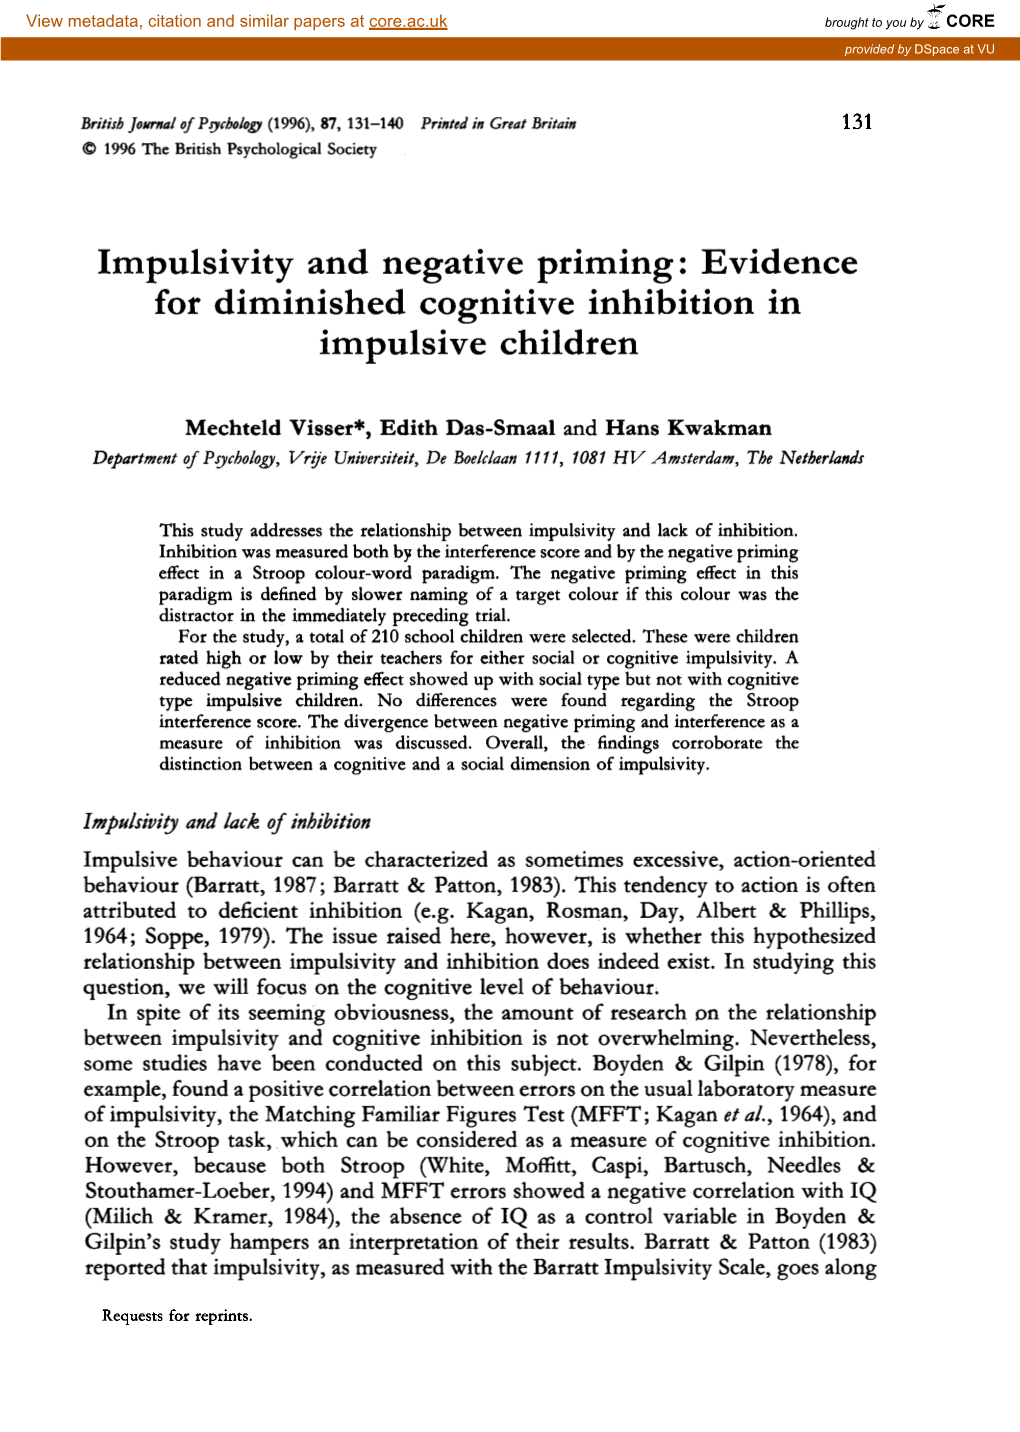 Impulsivity and Negative Priming: Evidence for Diminished Cognitive Inhibition in Im Pulsi Ve Children